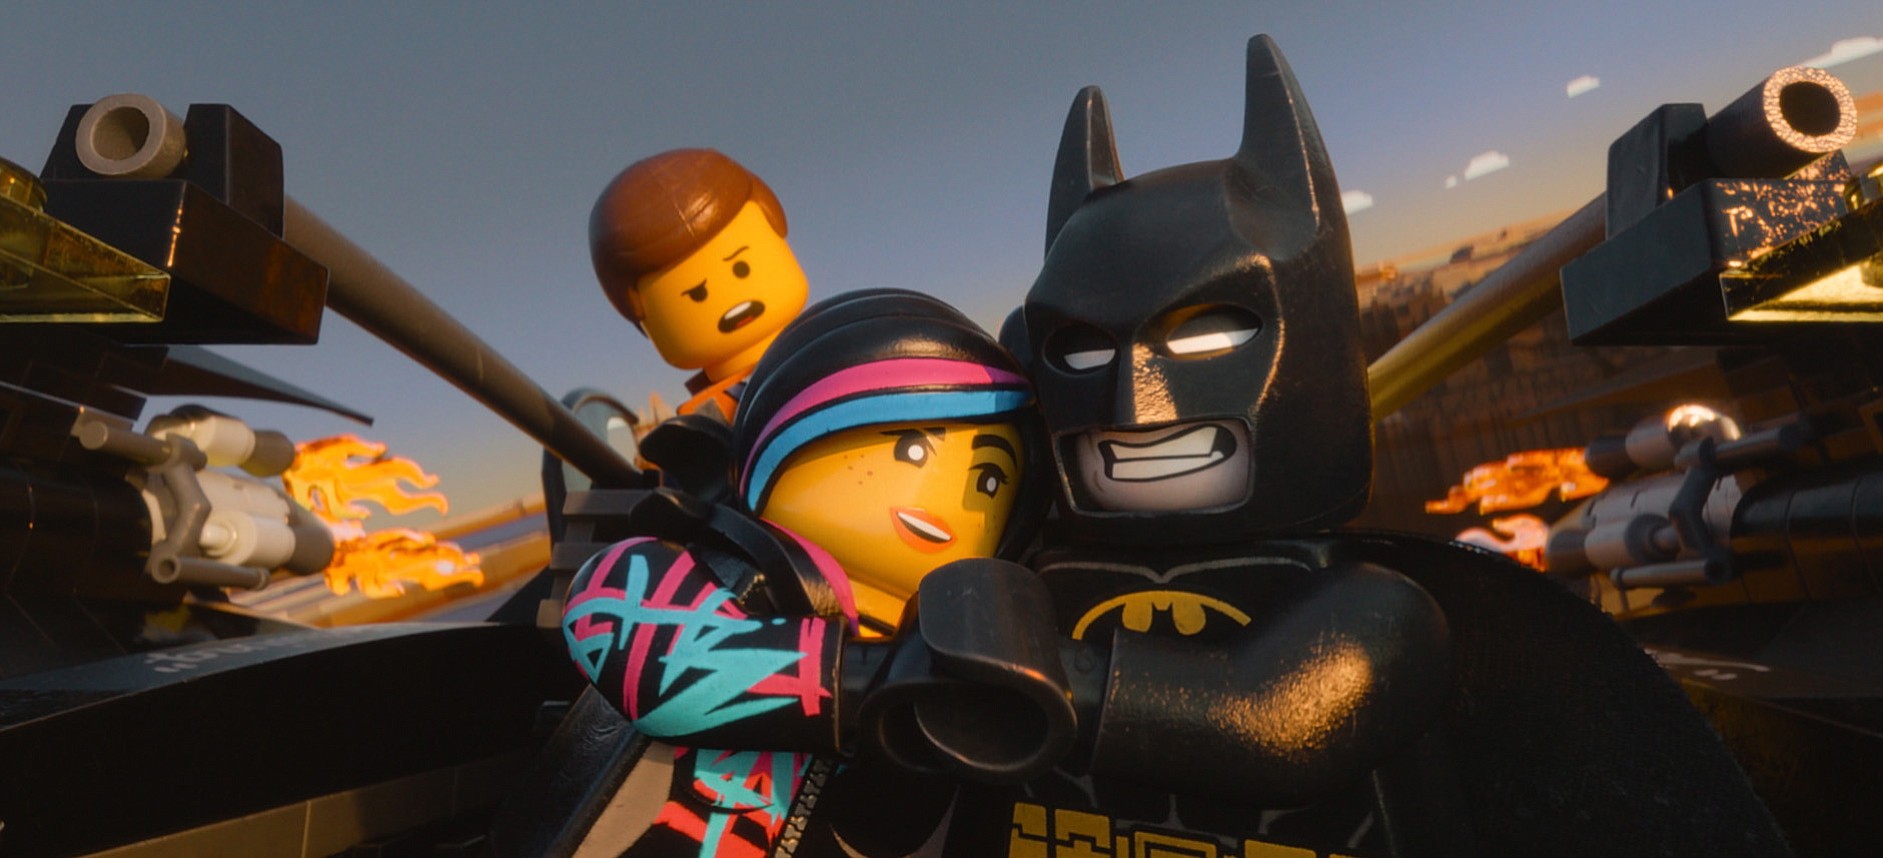 &quot;The Lego Movie&quot; will be shown during Friday's Flicks on the Bricks at Pioneer Courthouse Square. (AP Photo/Warner Bros.